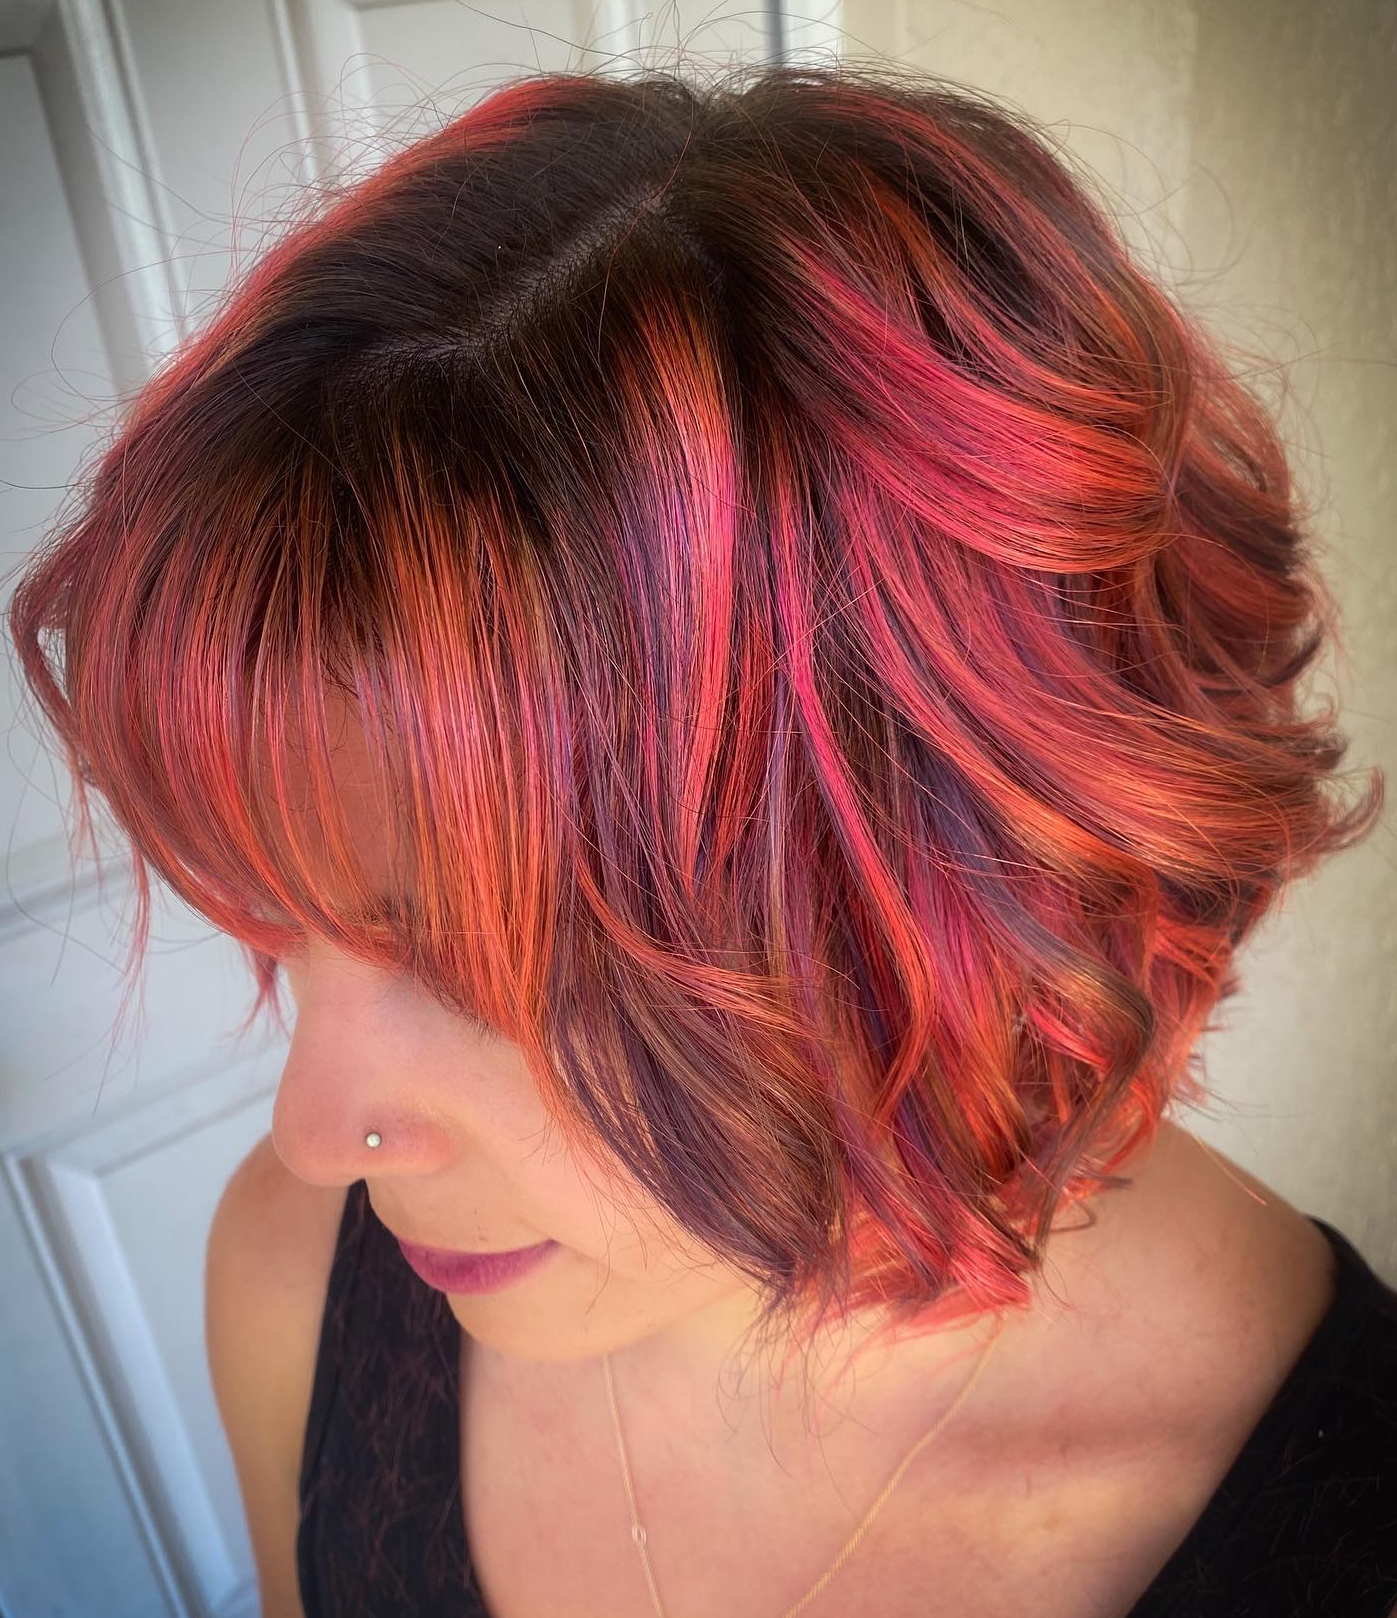 Rose Gold and Copper Highlights on Bixie Cut